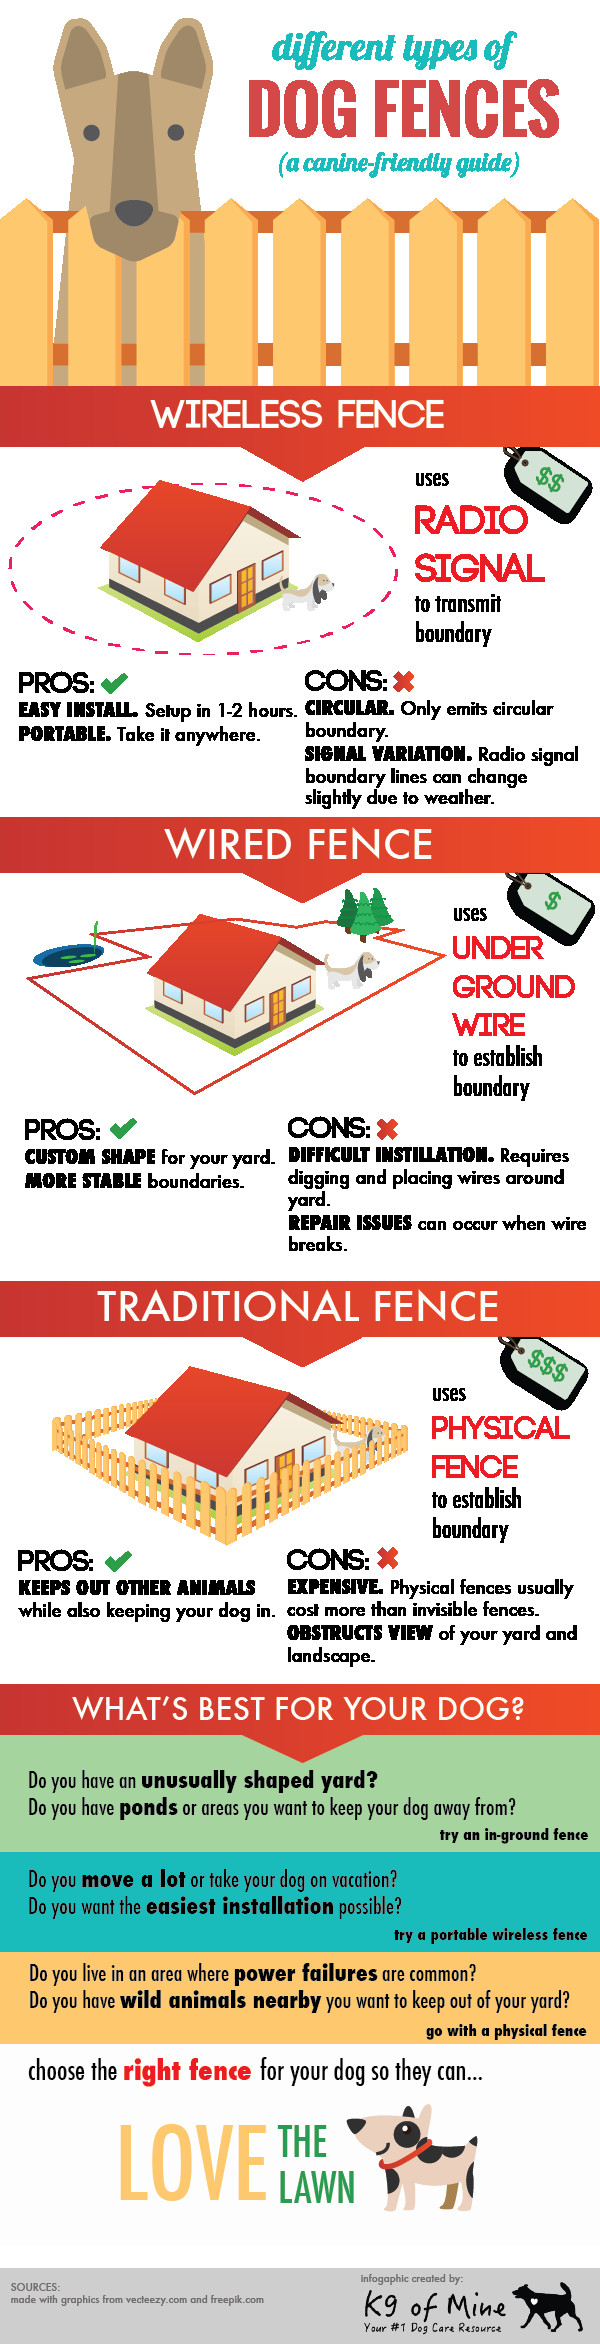 DIY Invisible Dog Fence
 Invisible Dog Fence 101 Guide